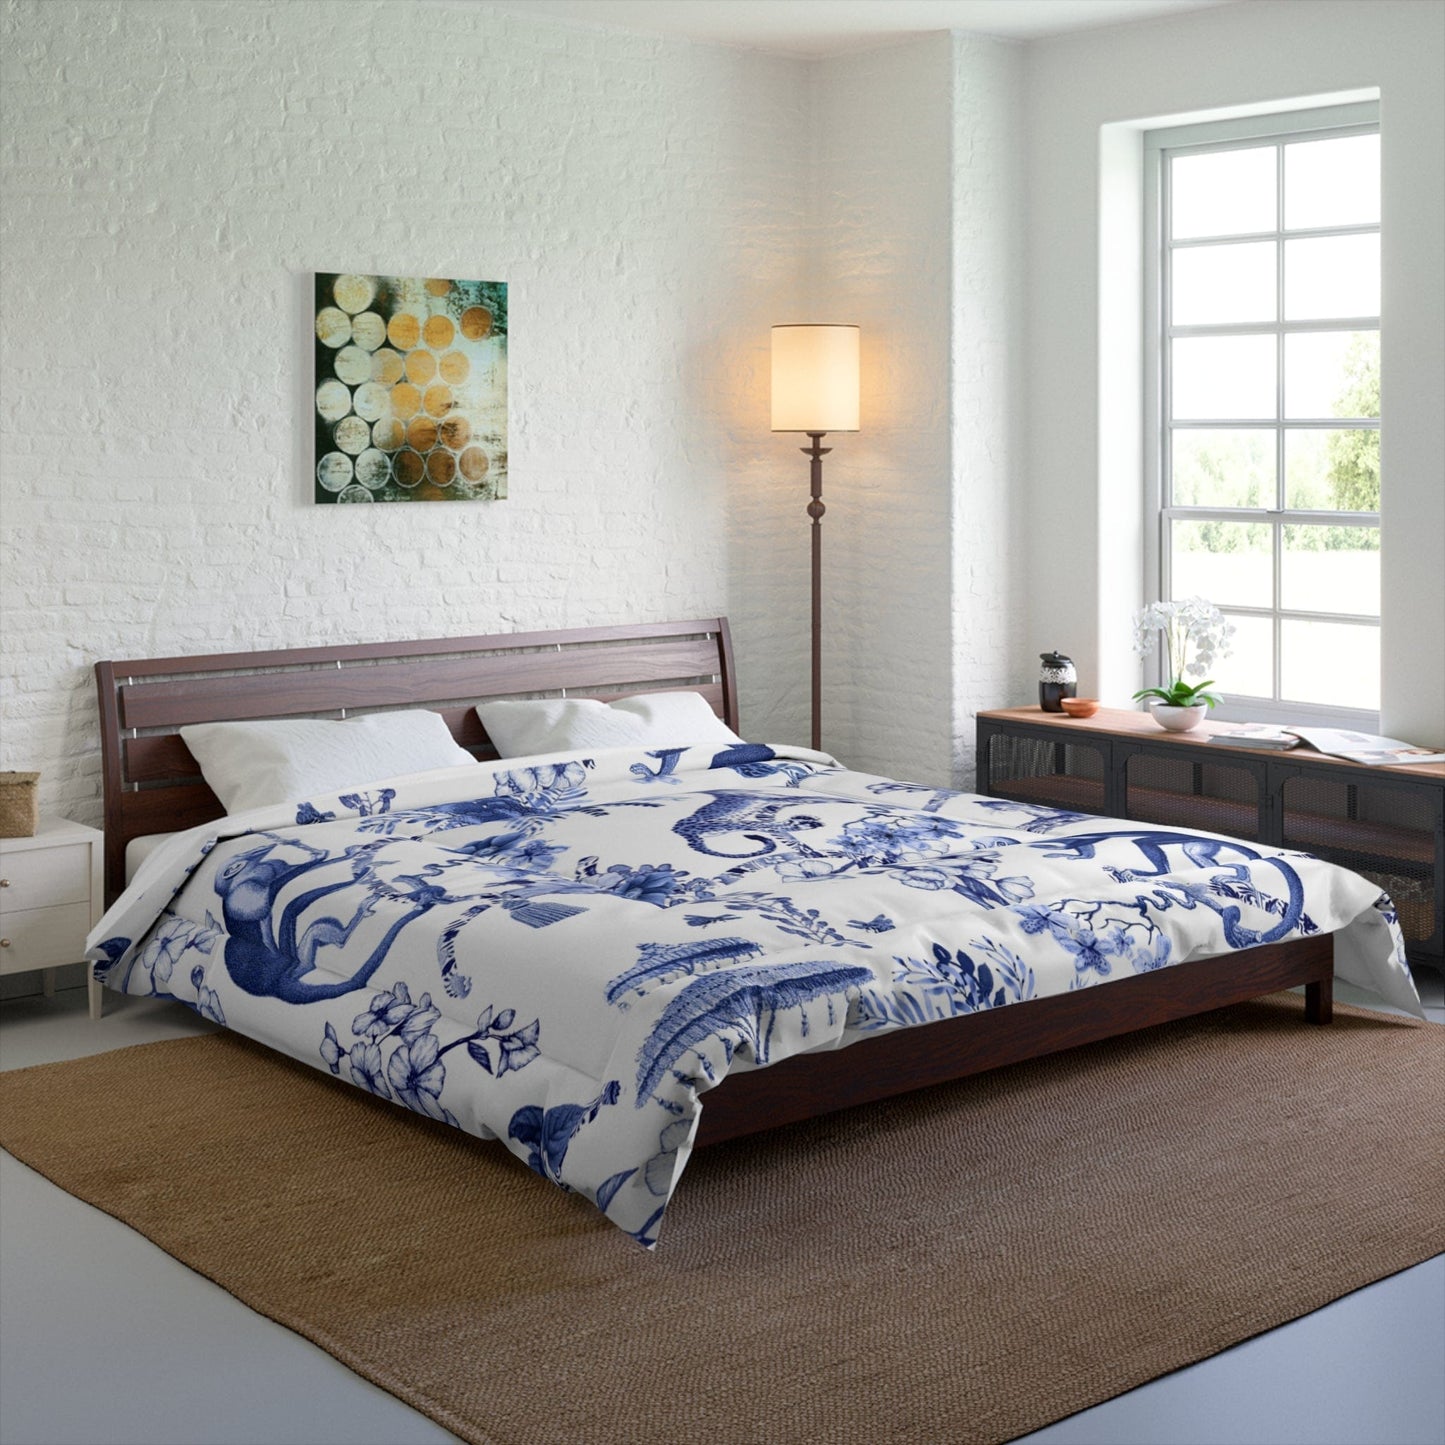 Kate McEnroe New York Floral Blue and White Chinoiserie Jungle Botanical Toile Comforter Comforters 104" × 88" 63686762632495954273